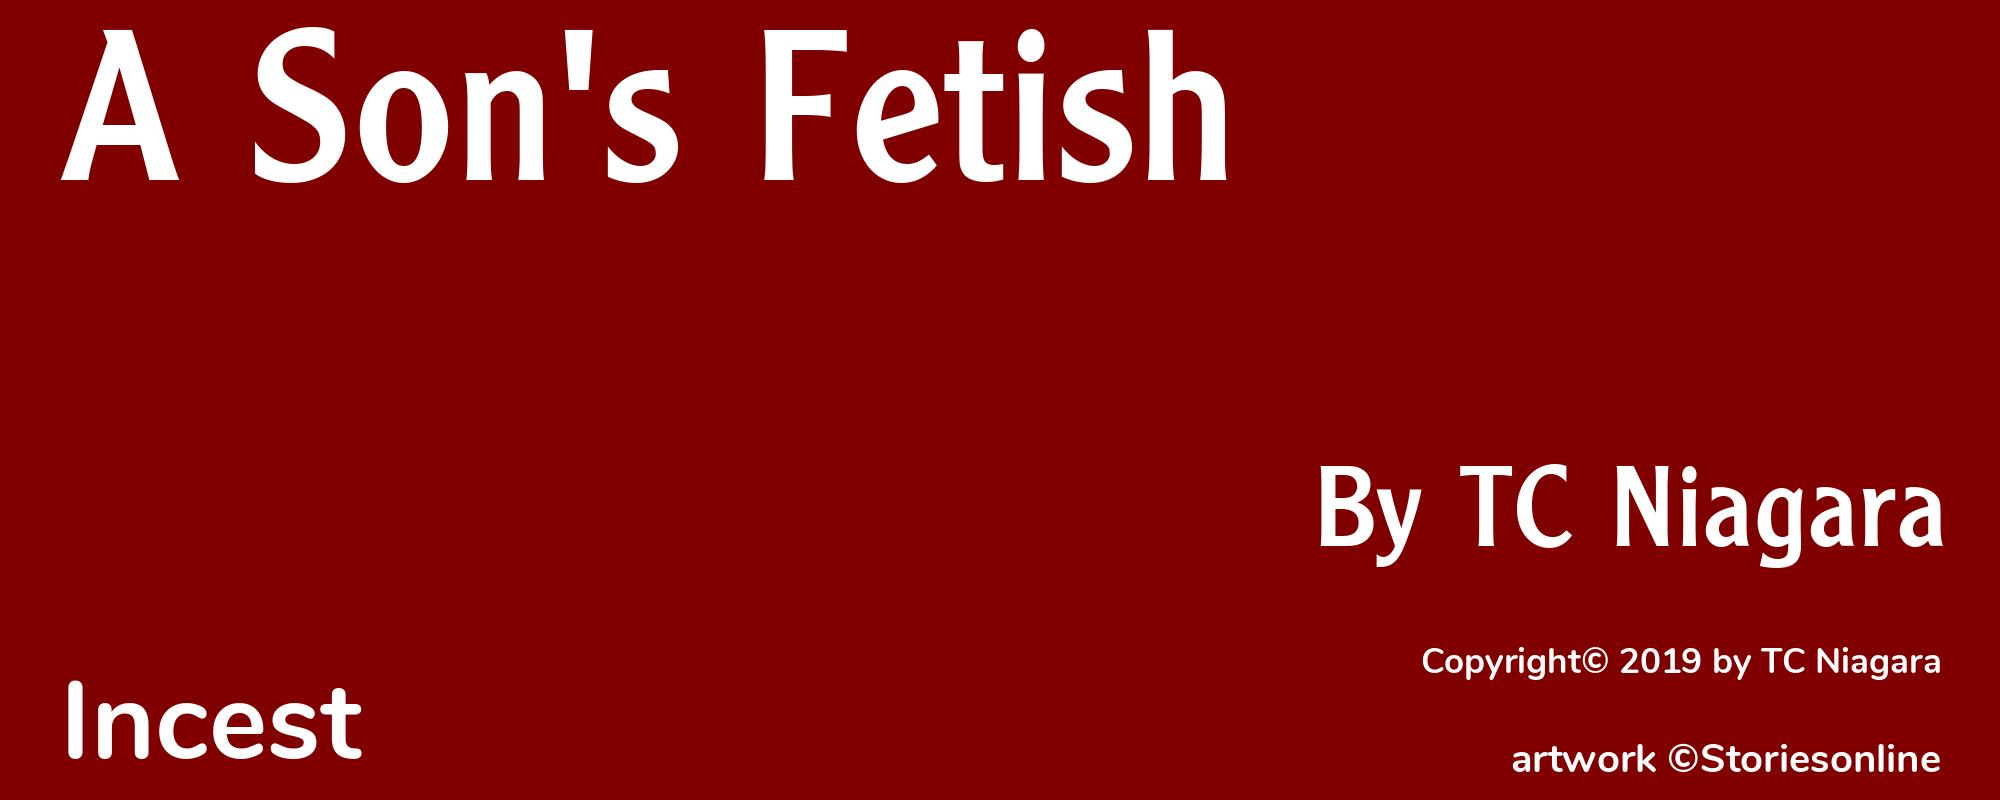 A Son's Fetish - Cover